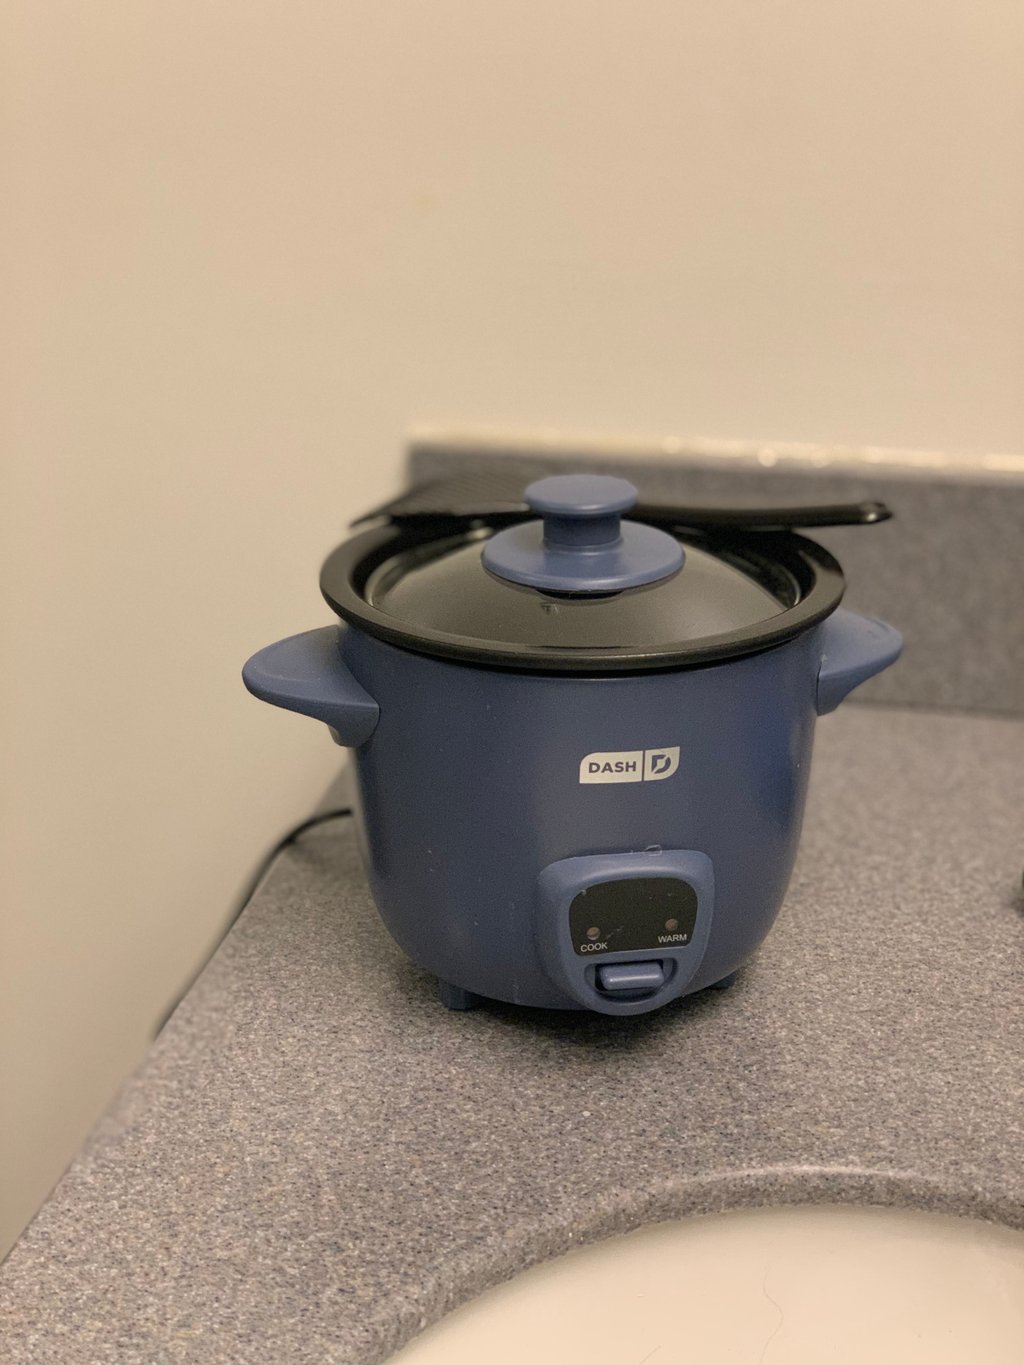 An Ode to My Mini Rice Cooker